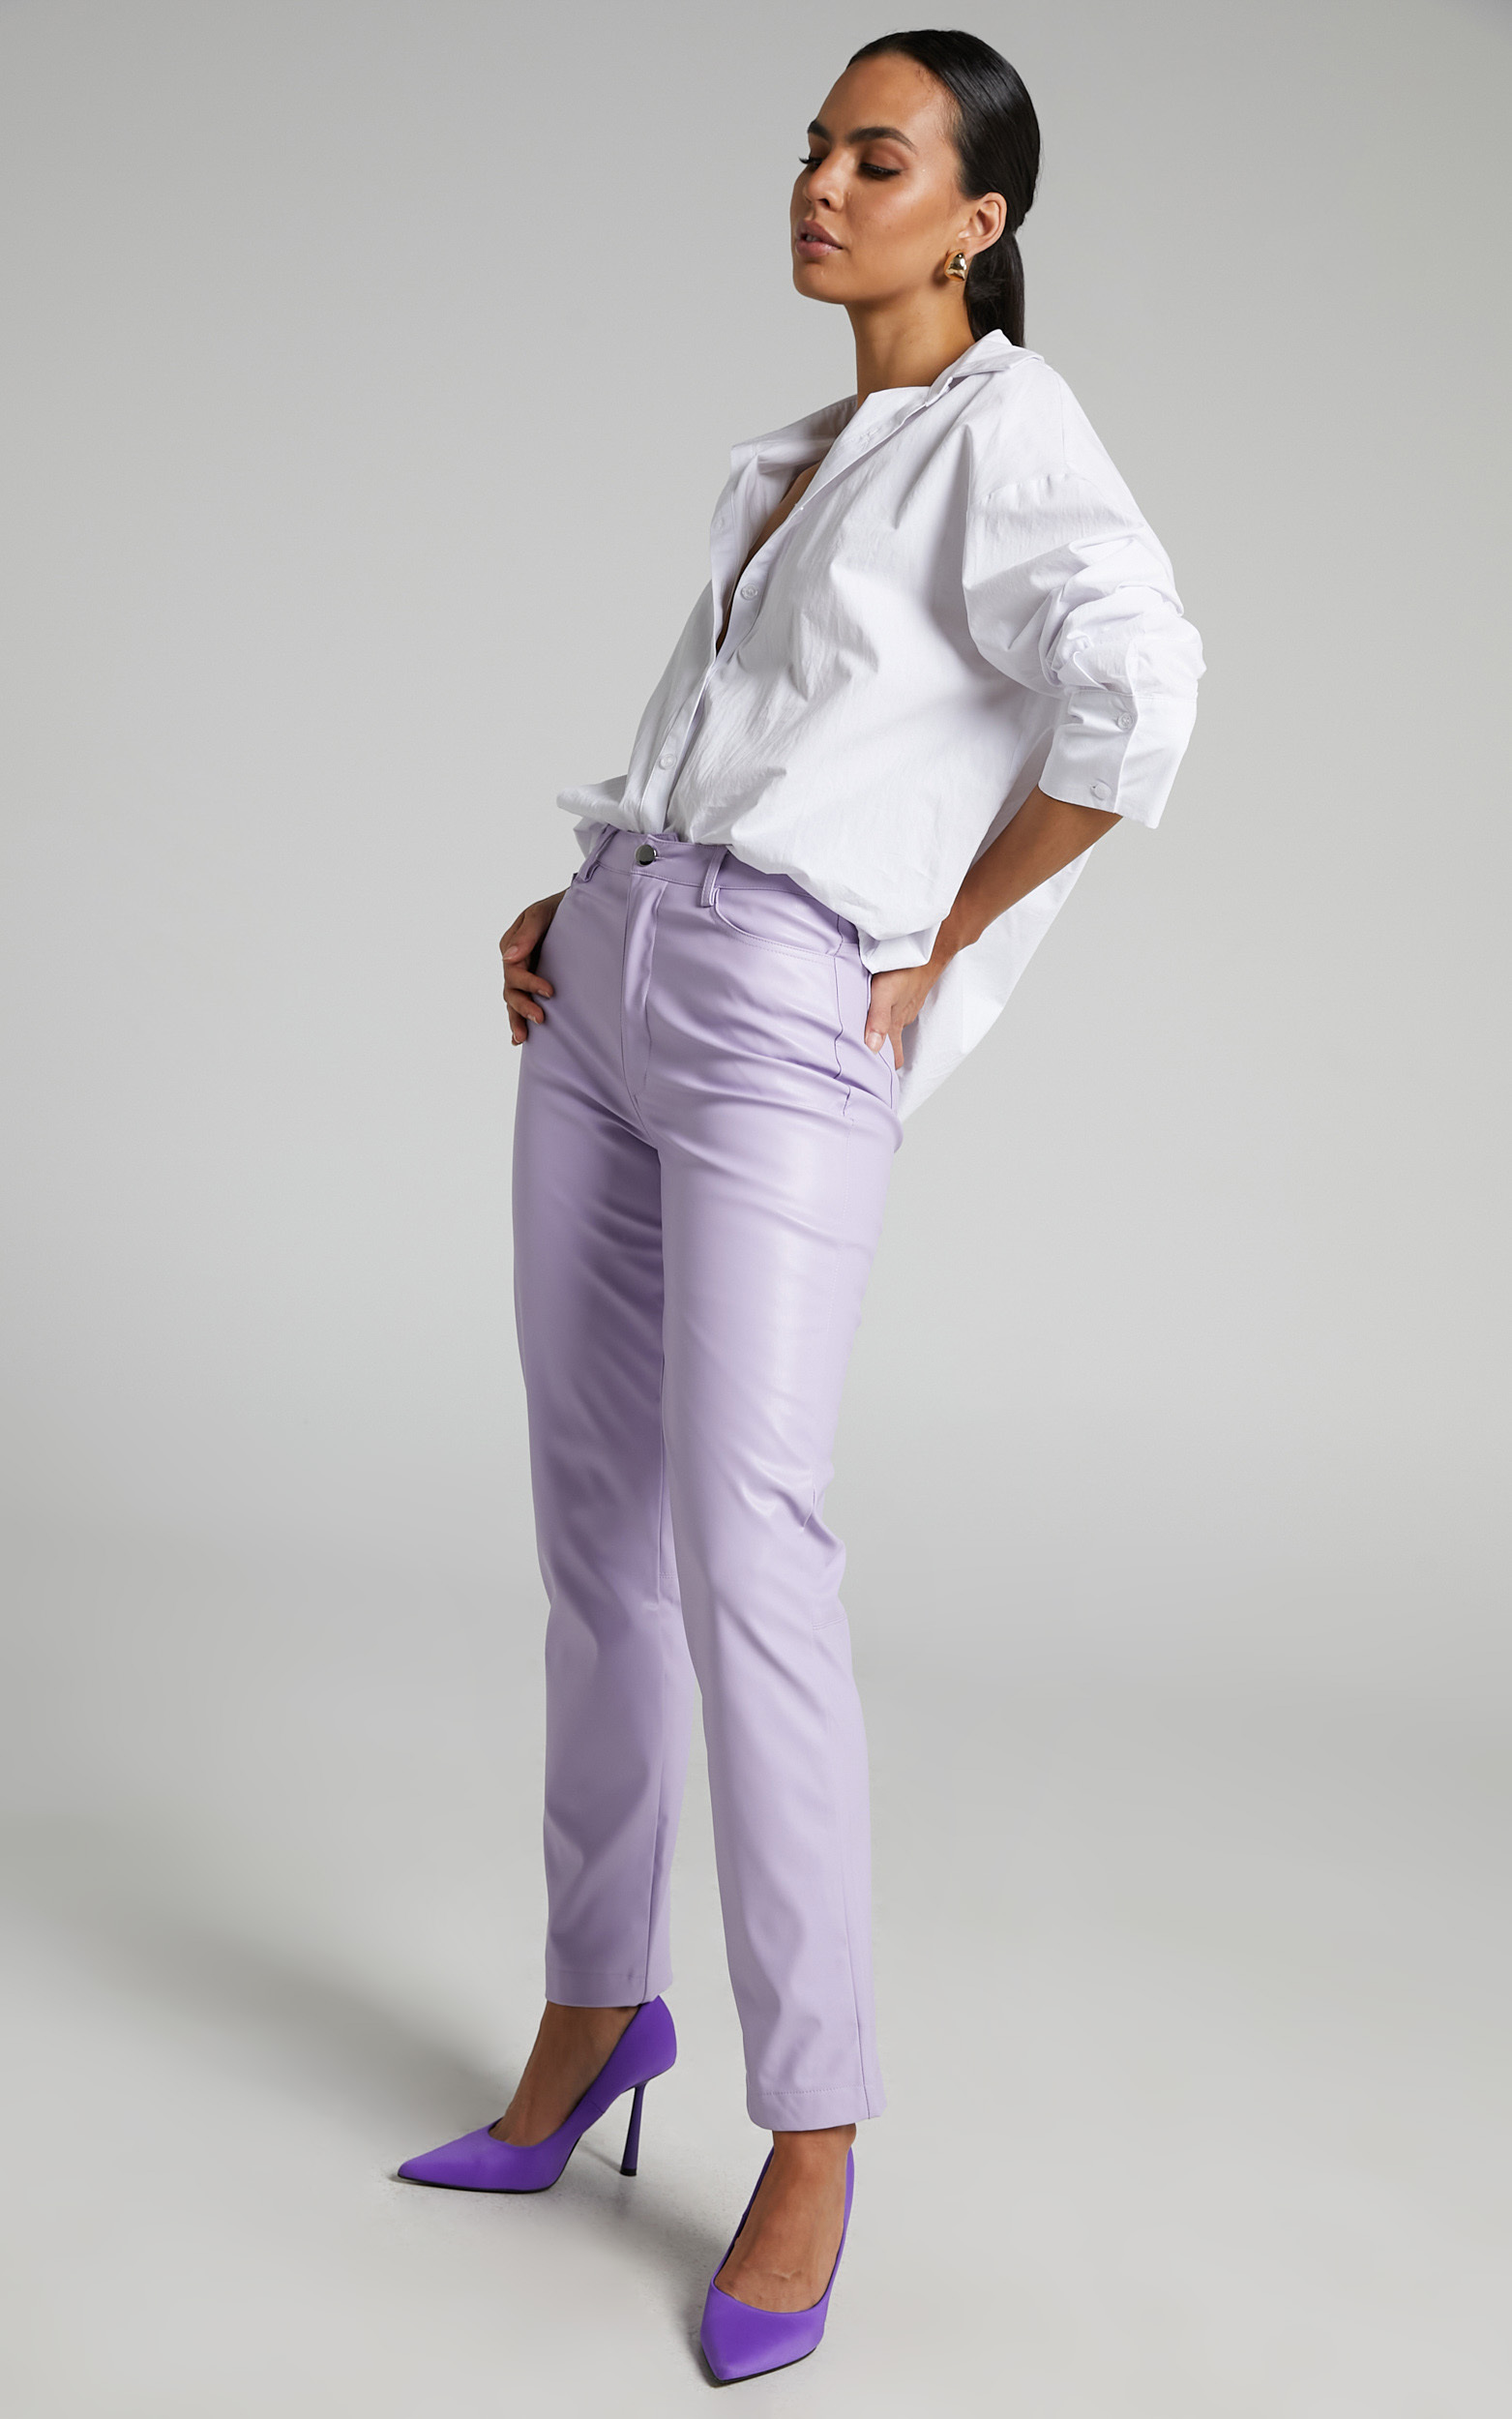 Dilyenne High Waist Straight Leg Faux Leather Pants in Lilac - 06, PRP5, hi-res image number null